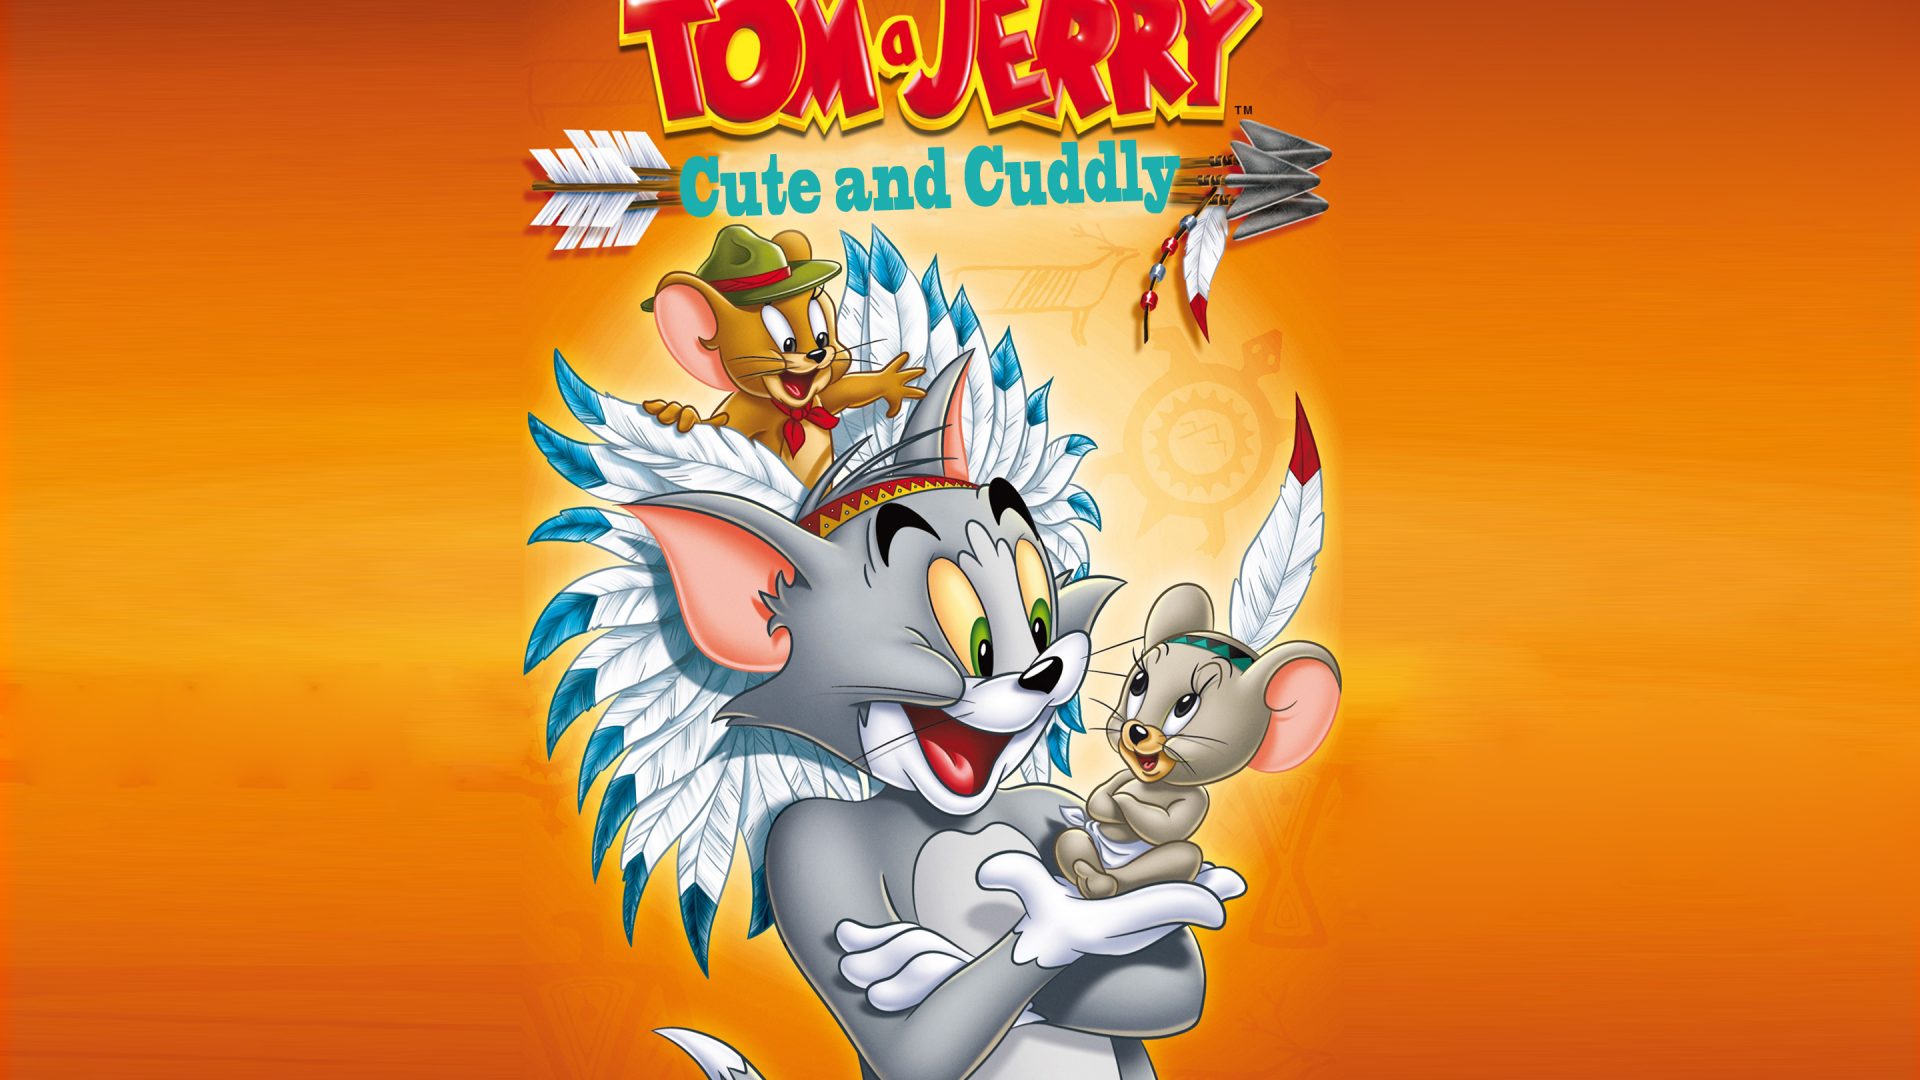 Tom And Jerry Cute & Cuddly - HD Wallpaper 